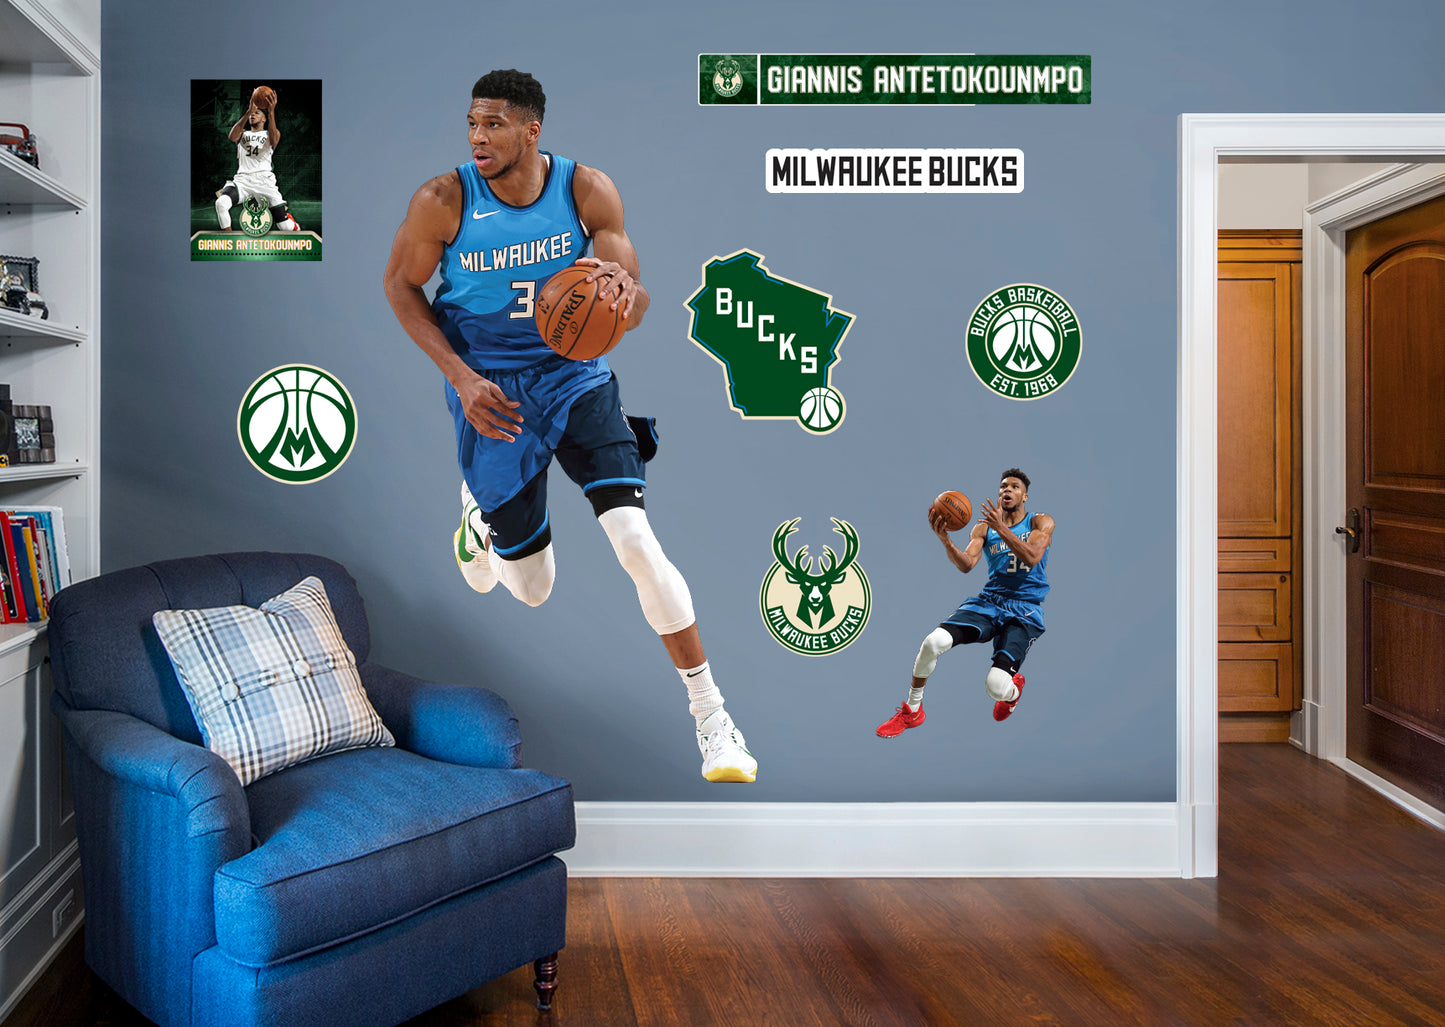 Giannis Antetokounmpo 2021  - Officially Licensed NBA Removable Wall Decal